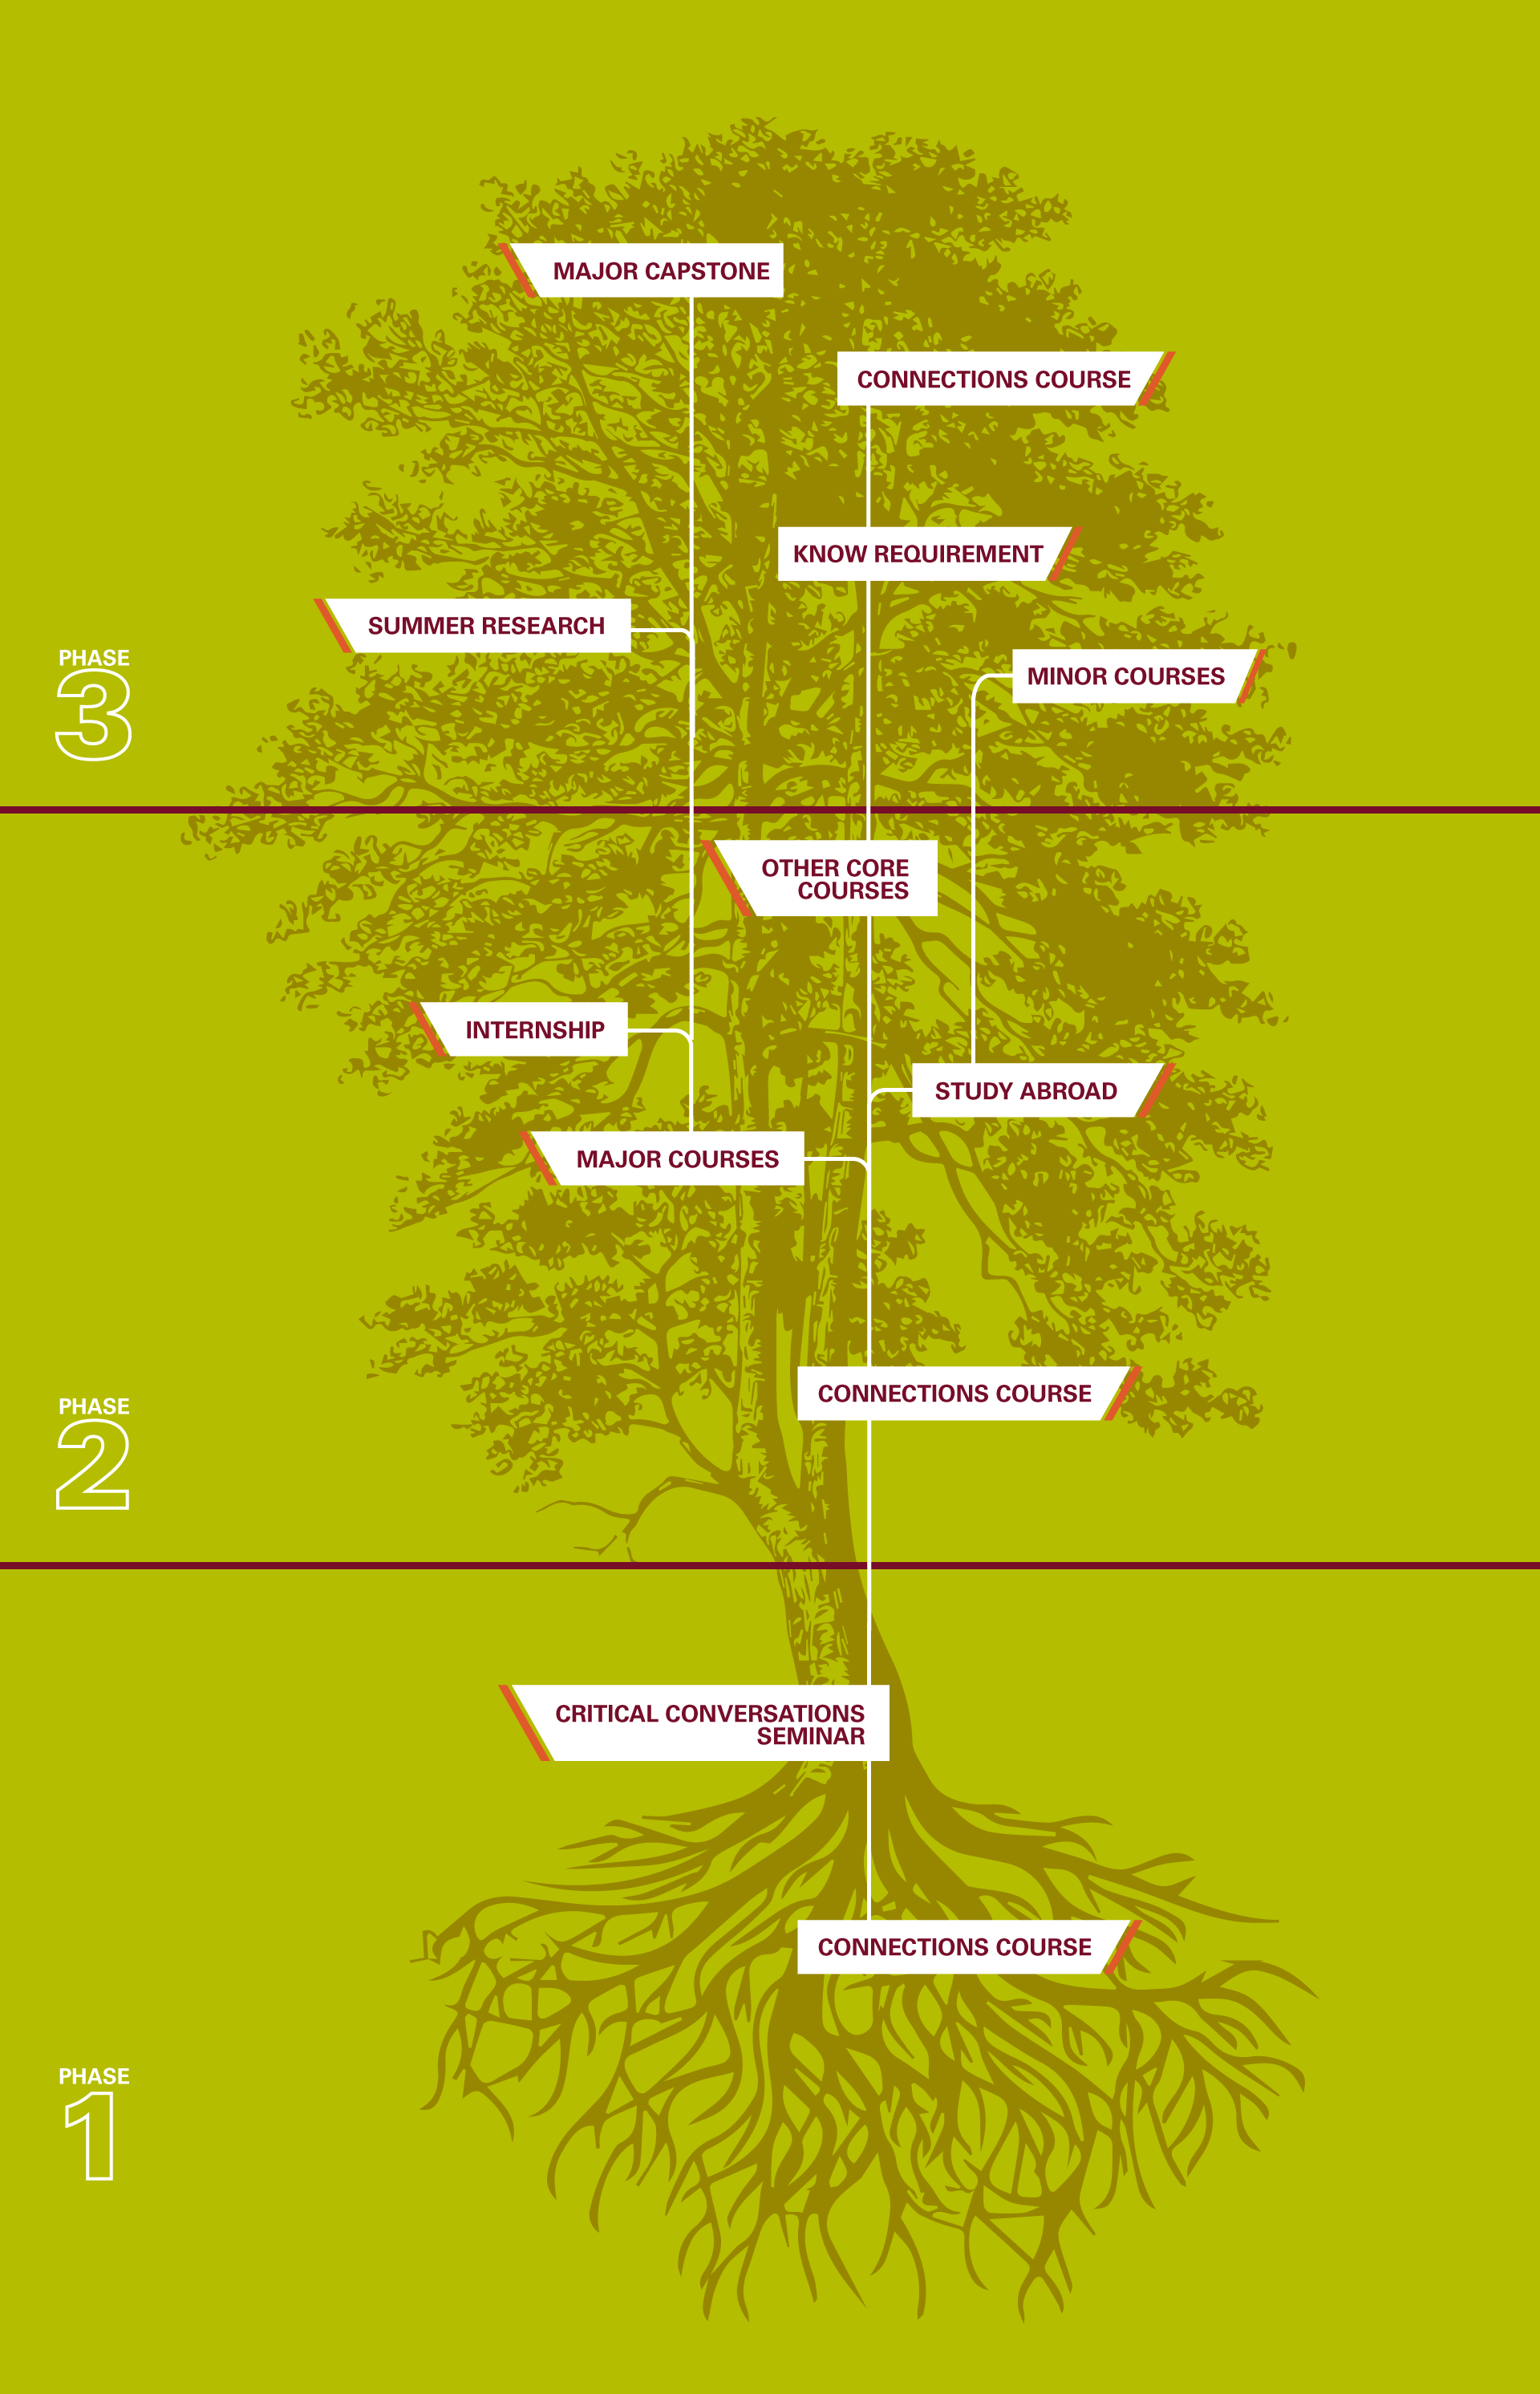 Tree graphic with lines and labels for the various aspects of the GROW core curriculum, including: Connections Course, Critical Conversations Seminar, another Connections Course, Major Courses, Study Abroad, Internship, Other Core Courses, Minor Courses, Summer Research, KNOW Requirement, Connections Course, Major Capstone